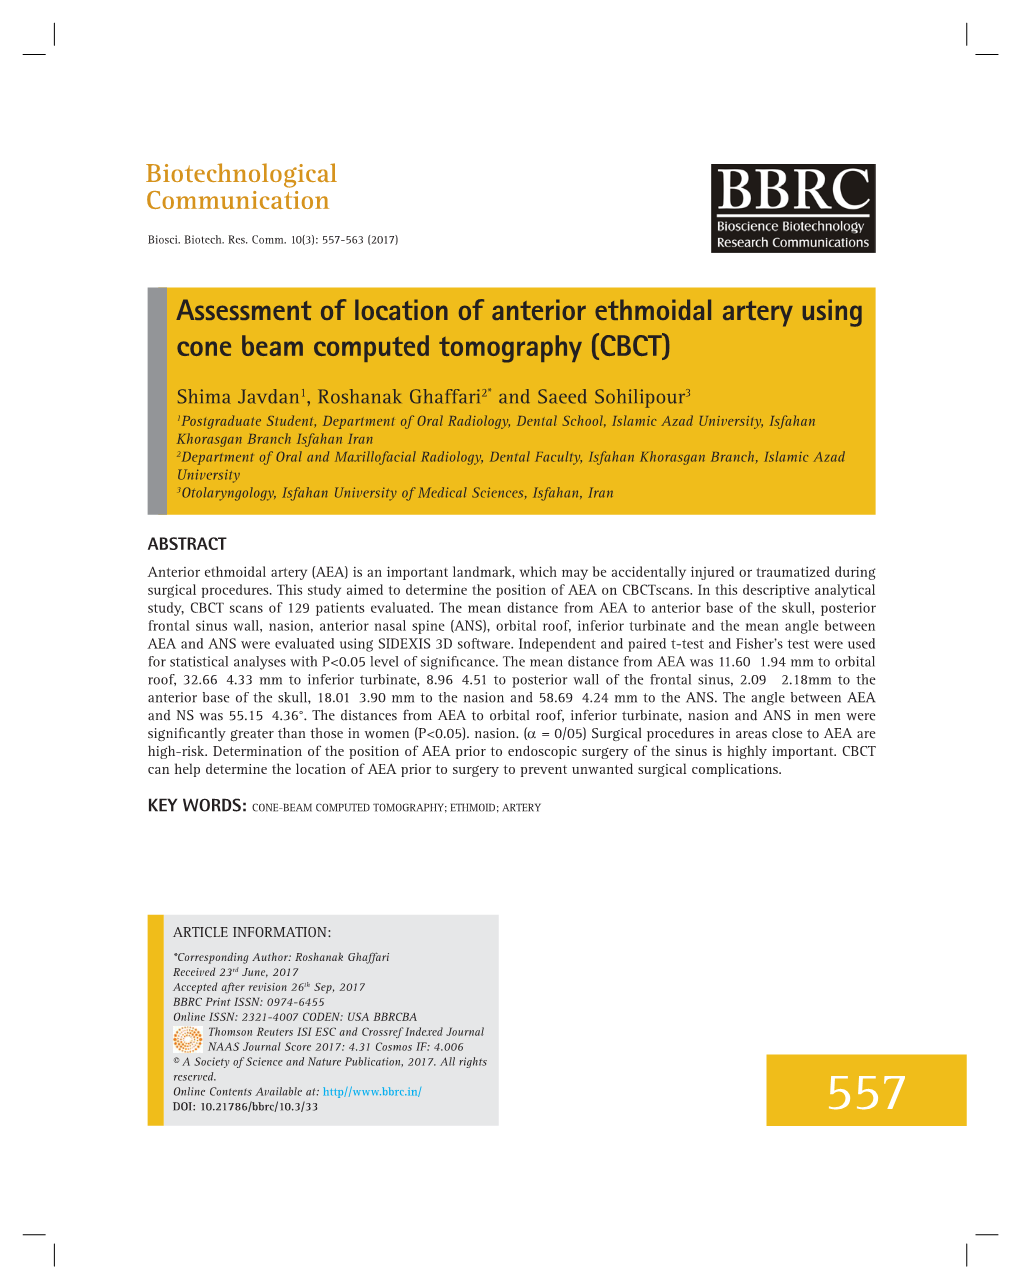 Assessment of Location of Anterior Ethmoidal Artery Using Cone Beam Computed Tomography (CBCT)